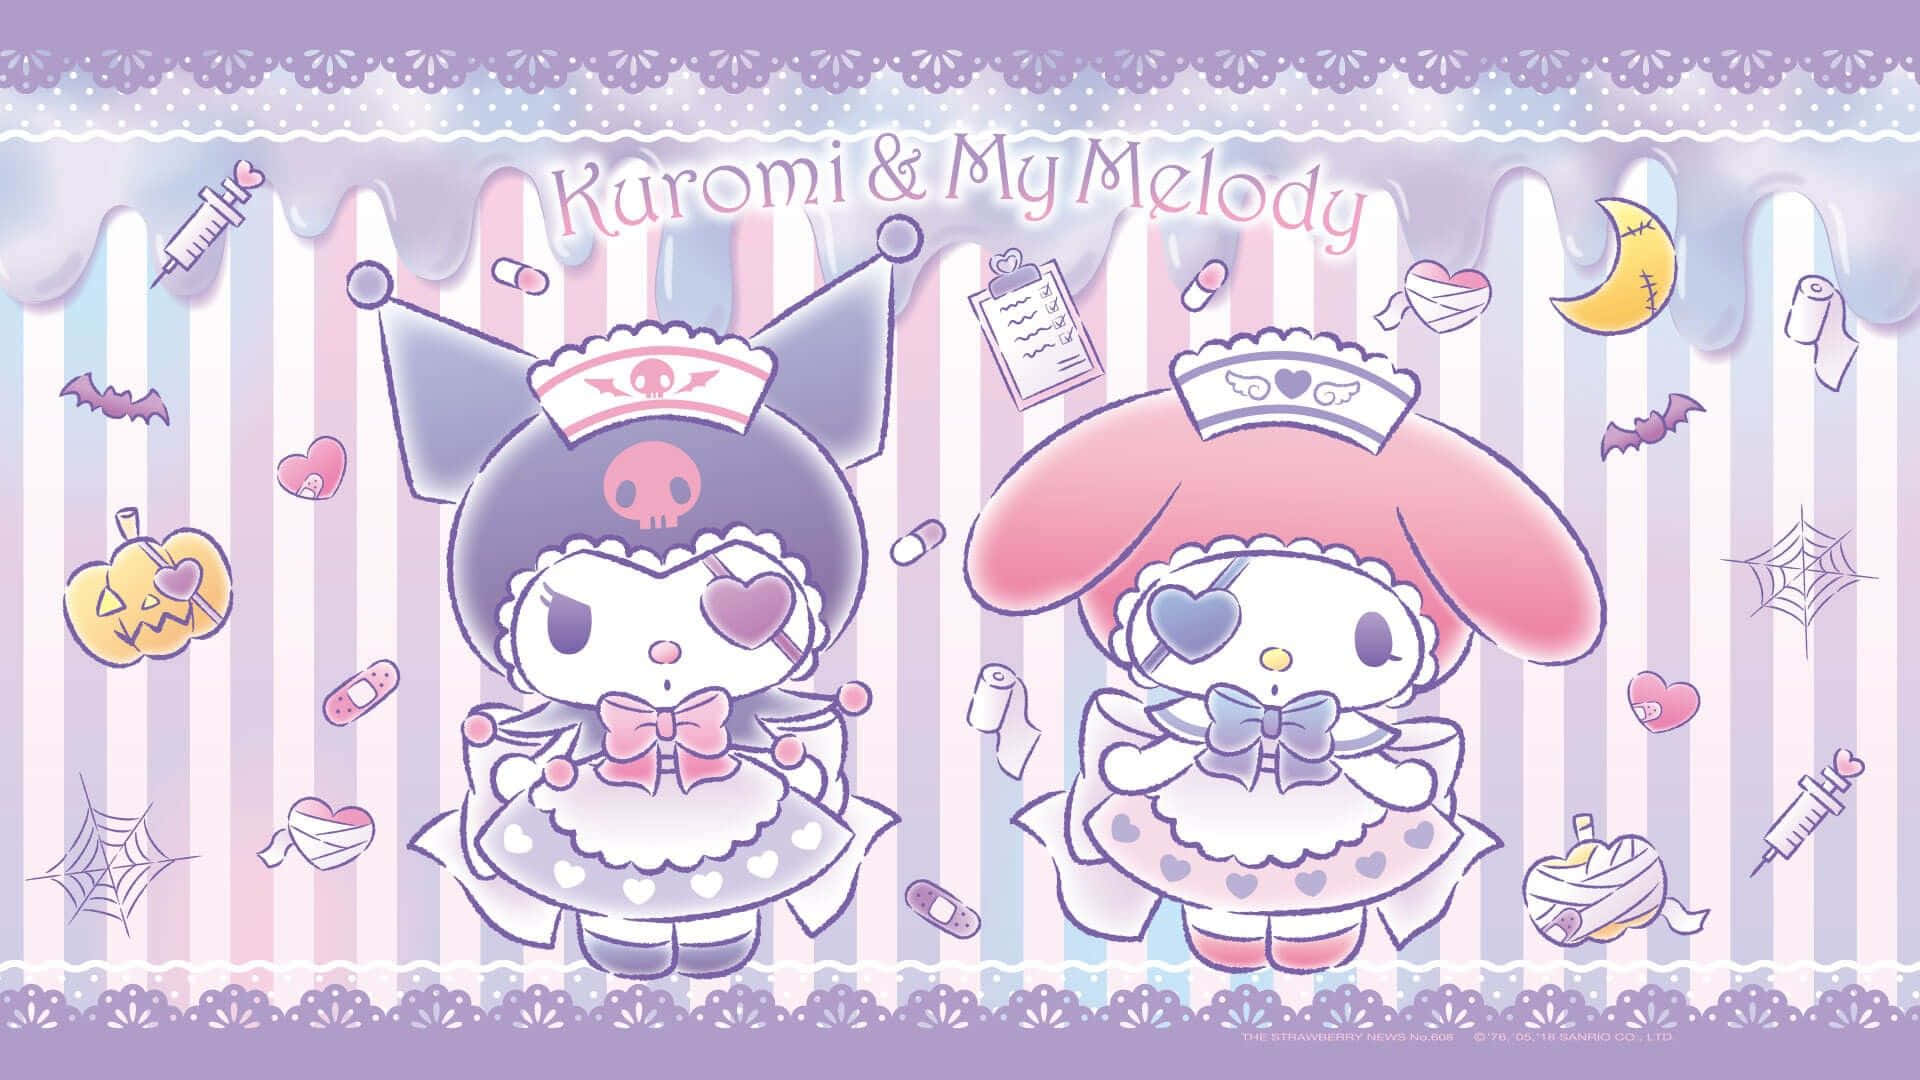 Customize your desktop with My Melody wallpapers Wallpaper